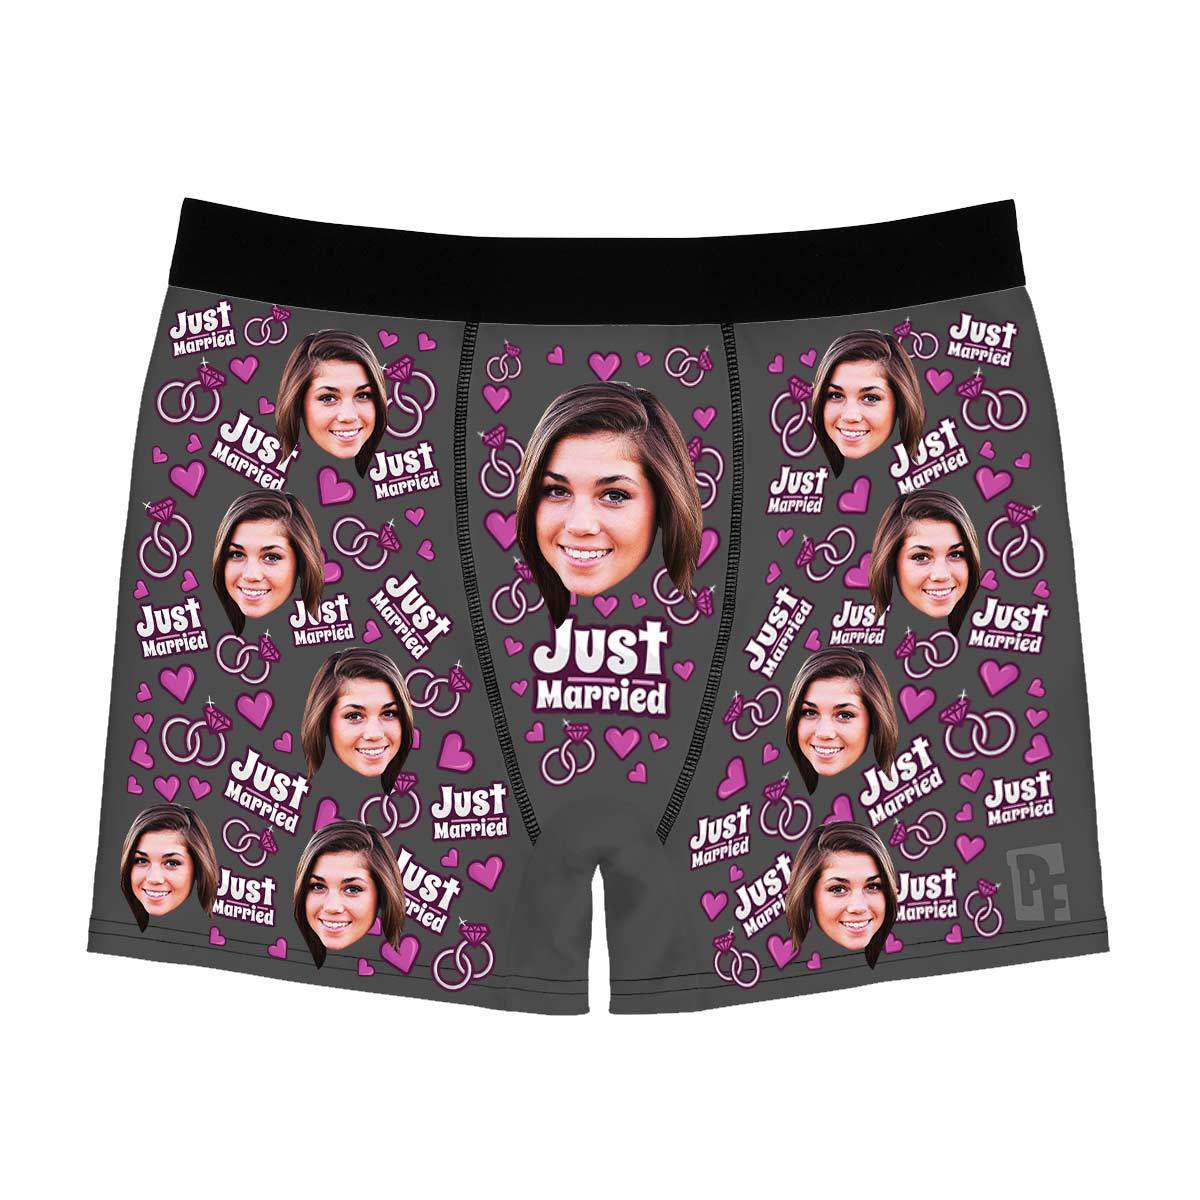 Dark Just married men's boxer briefs personalized with photo printed on them